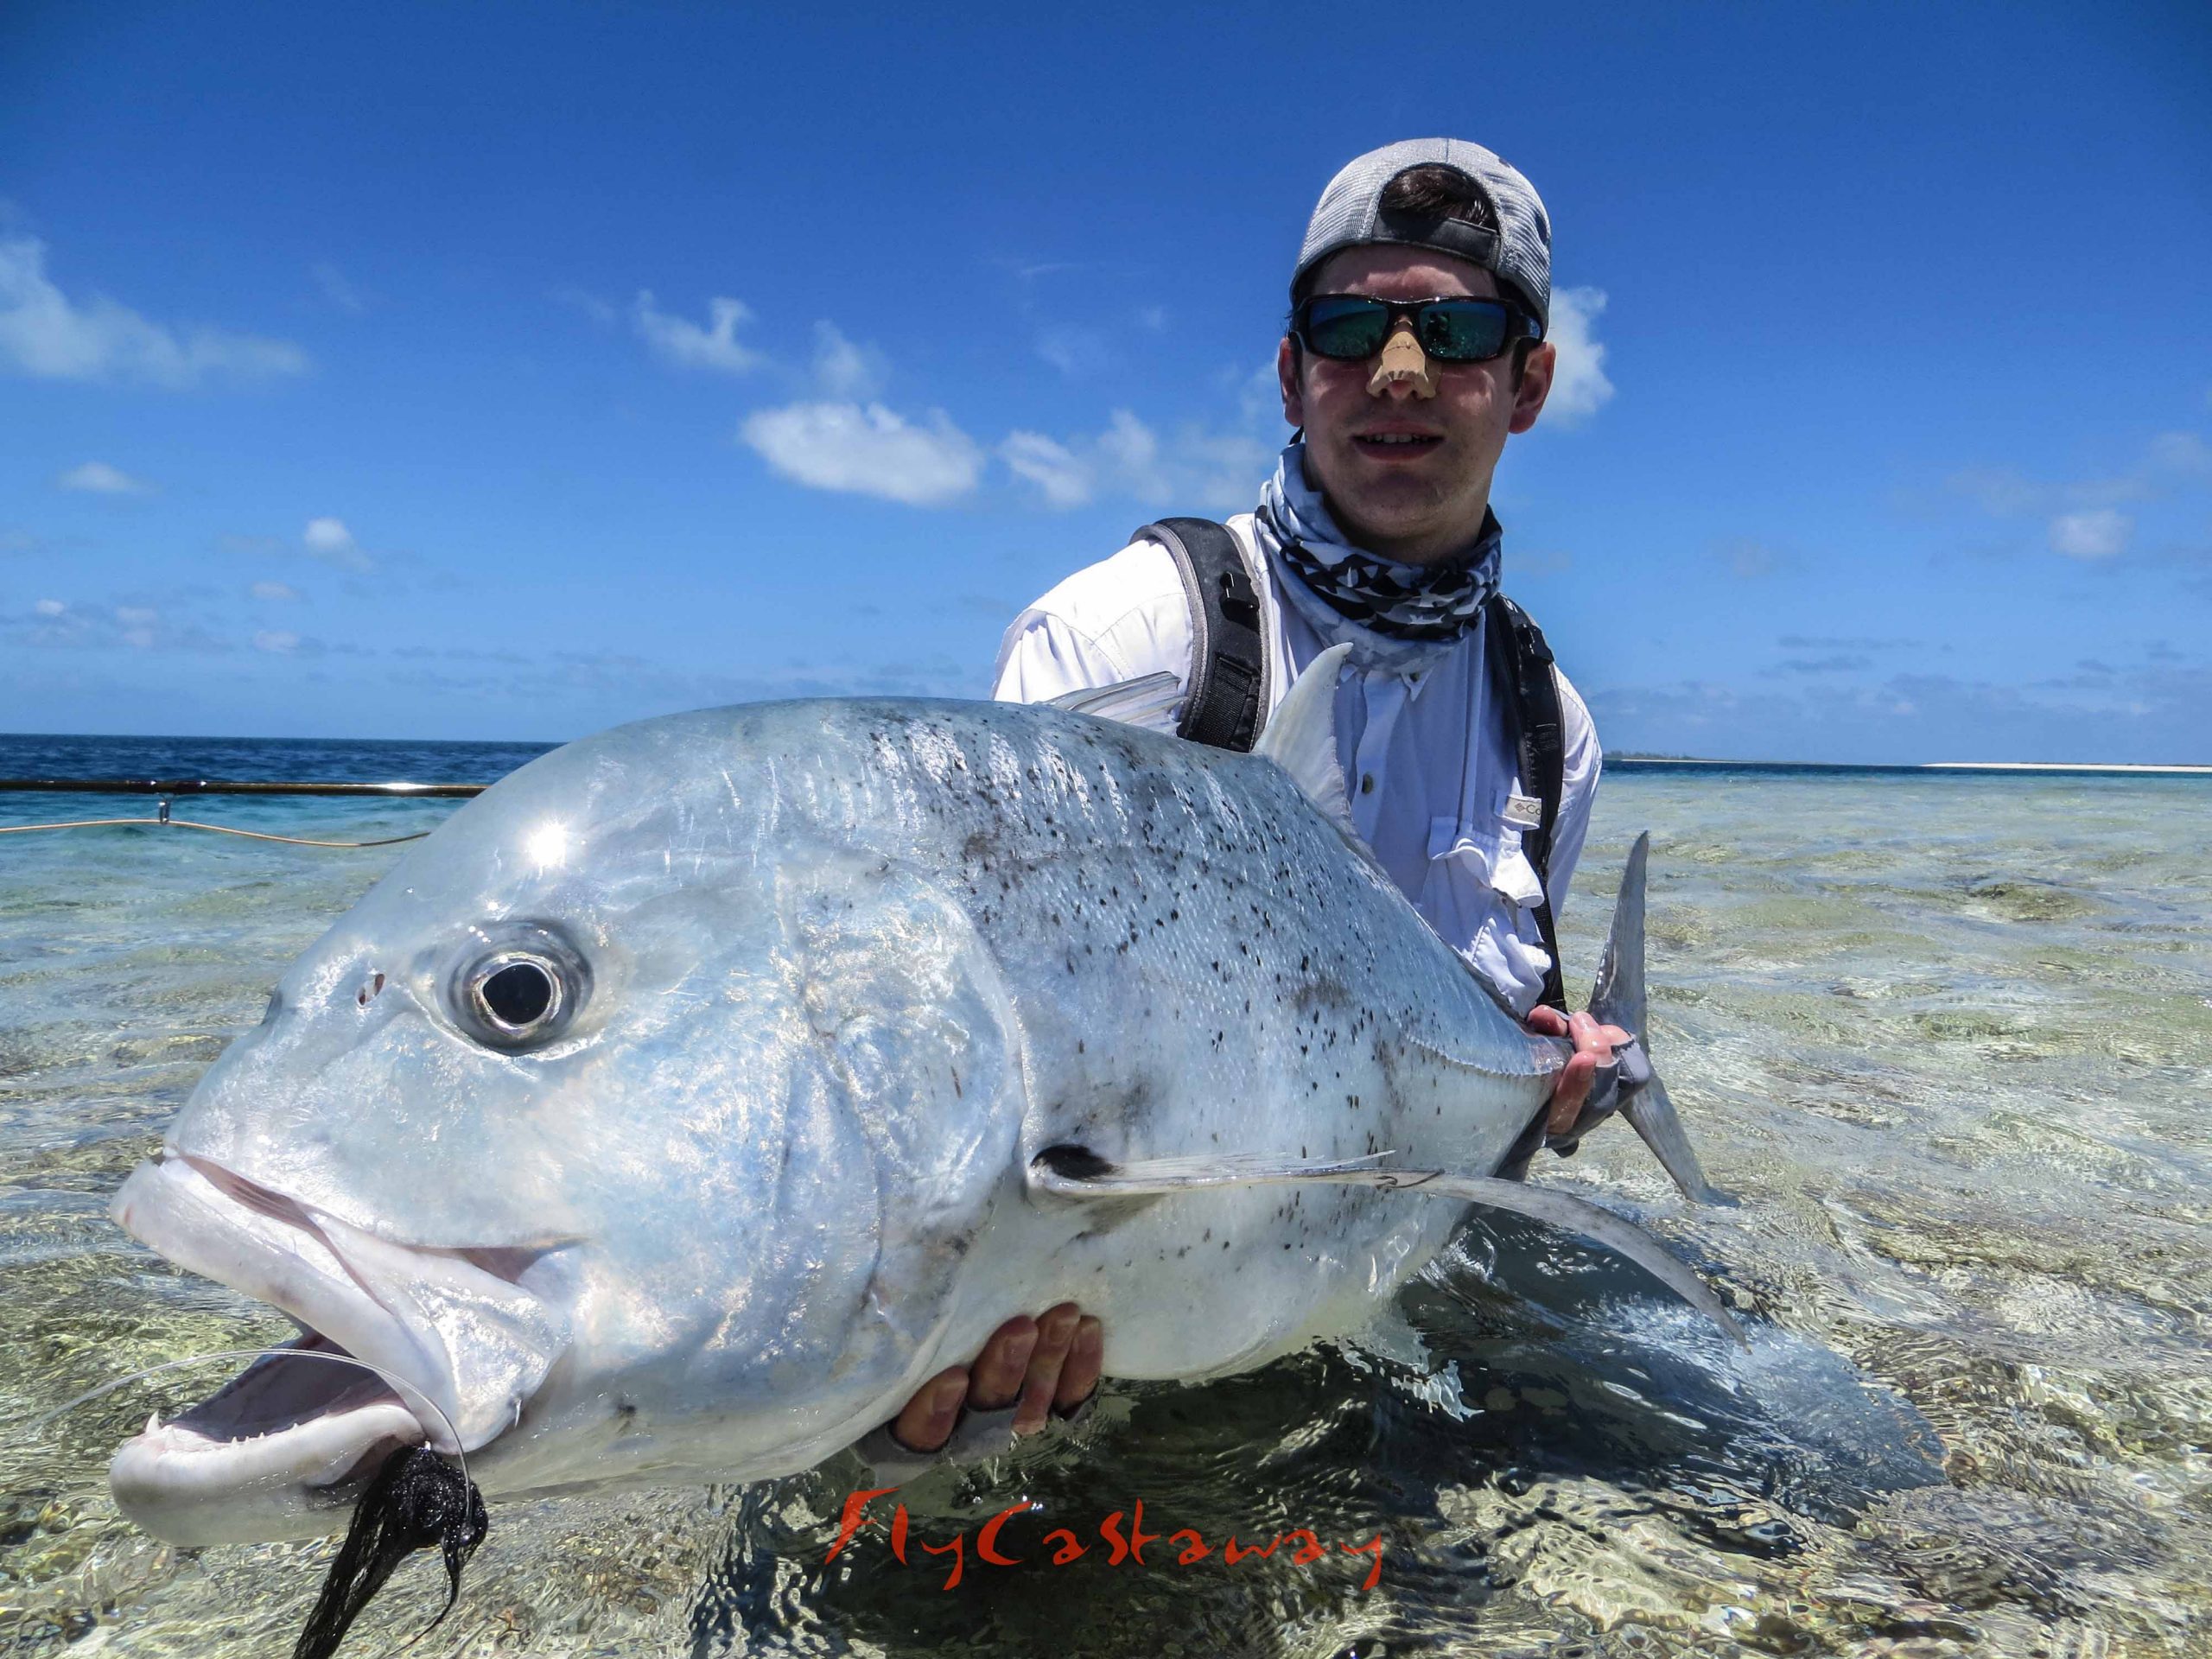 Tips to Catch Giant Trevally, Fishing Blog